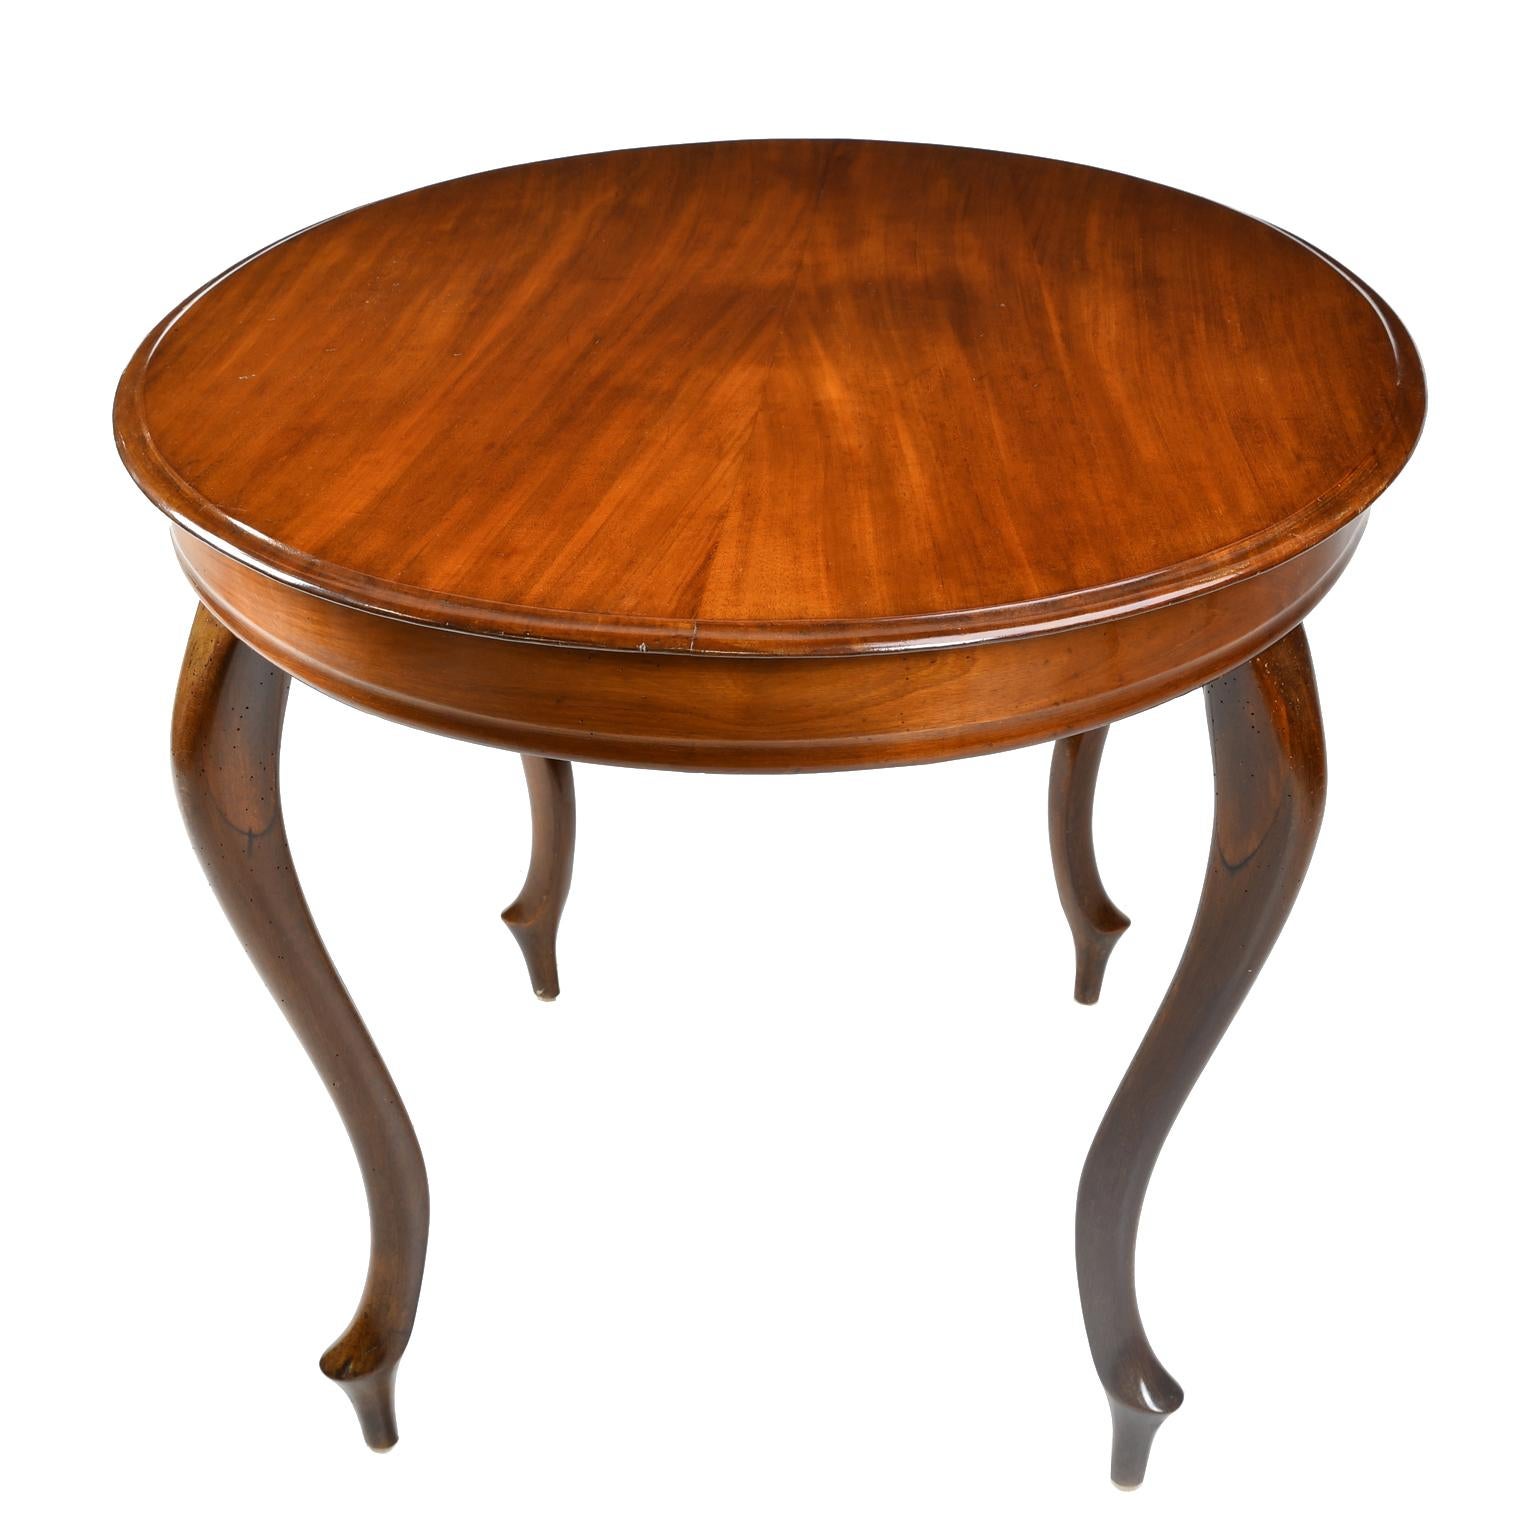 Danish Antique Louis Philippe Style Mahogany Oval Dining/ Center Table, Denmark, c 1860 For Sale